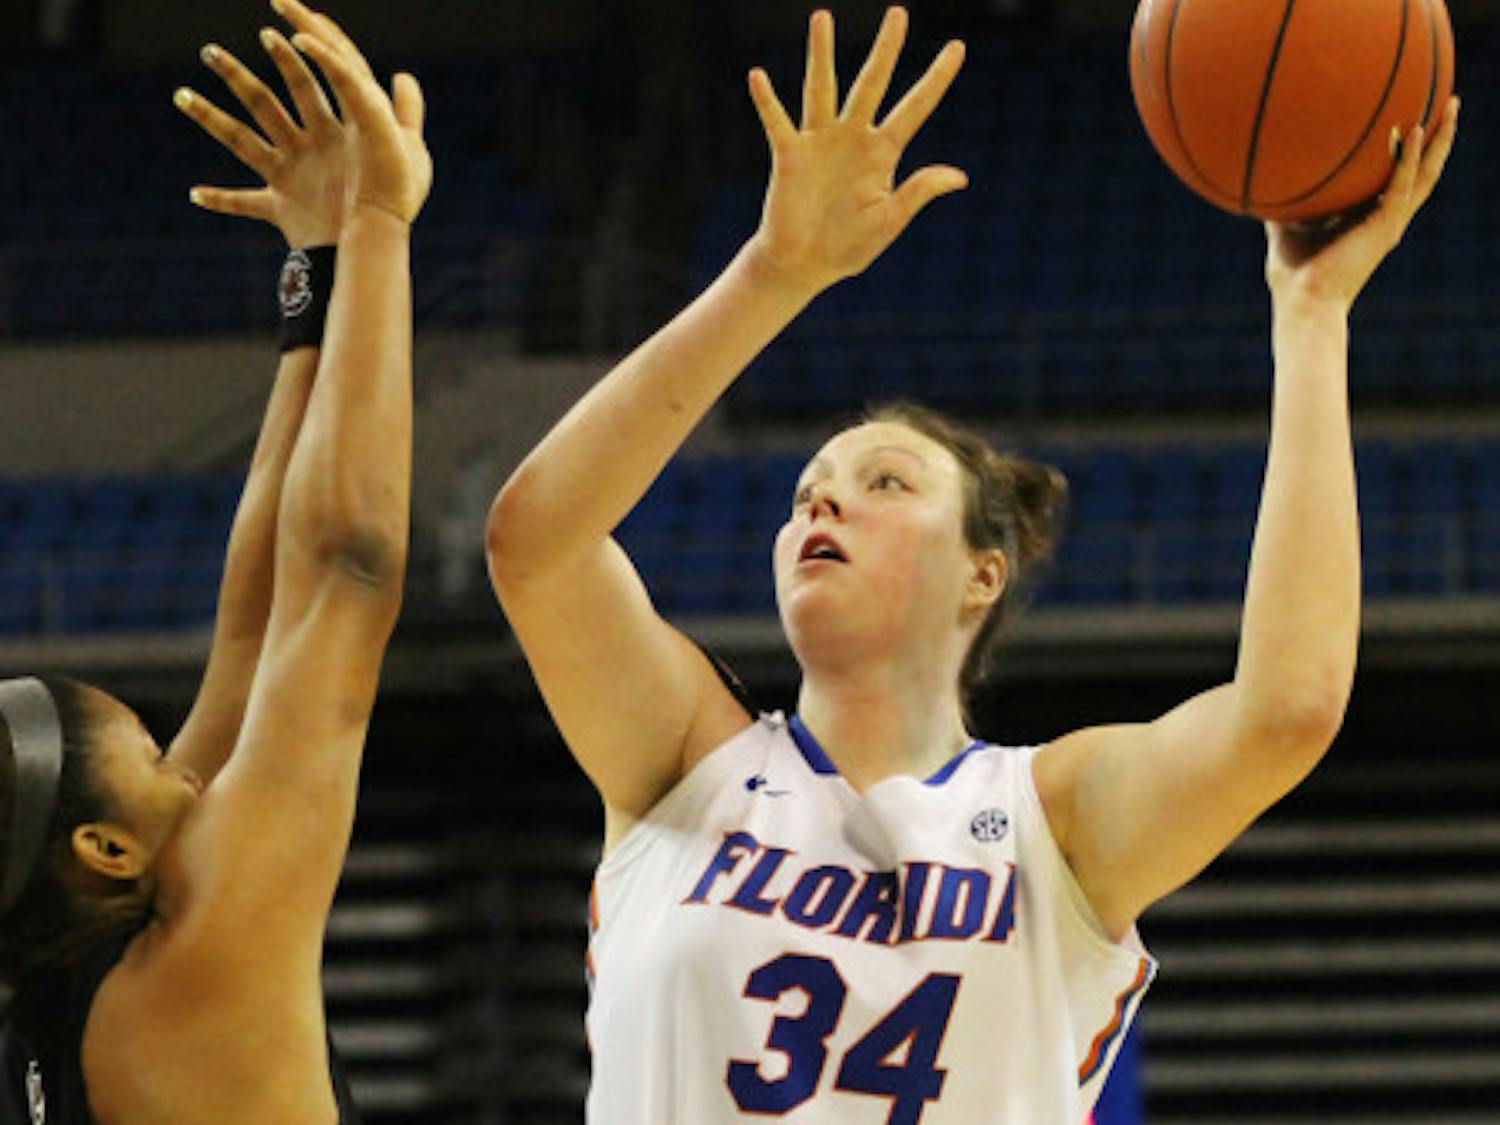 Florida center Vicky McIntyre (34) attempts a shot over a South Carolina defender in the O'Connell Center during Florida's 52-44 loss to South Carolina. After one season with the Gators, McIntyre will not return to UF next season. 